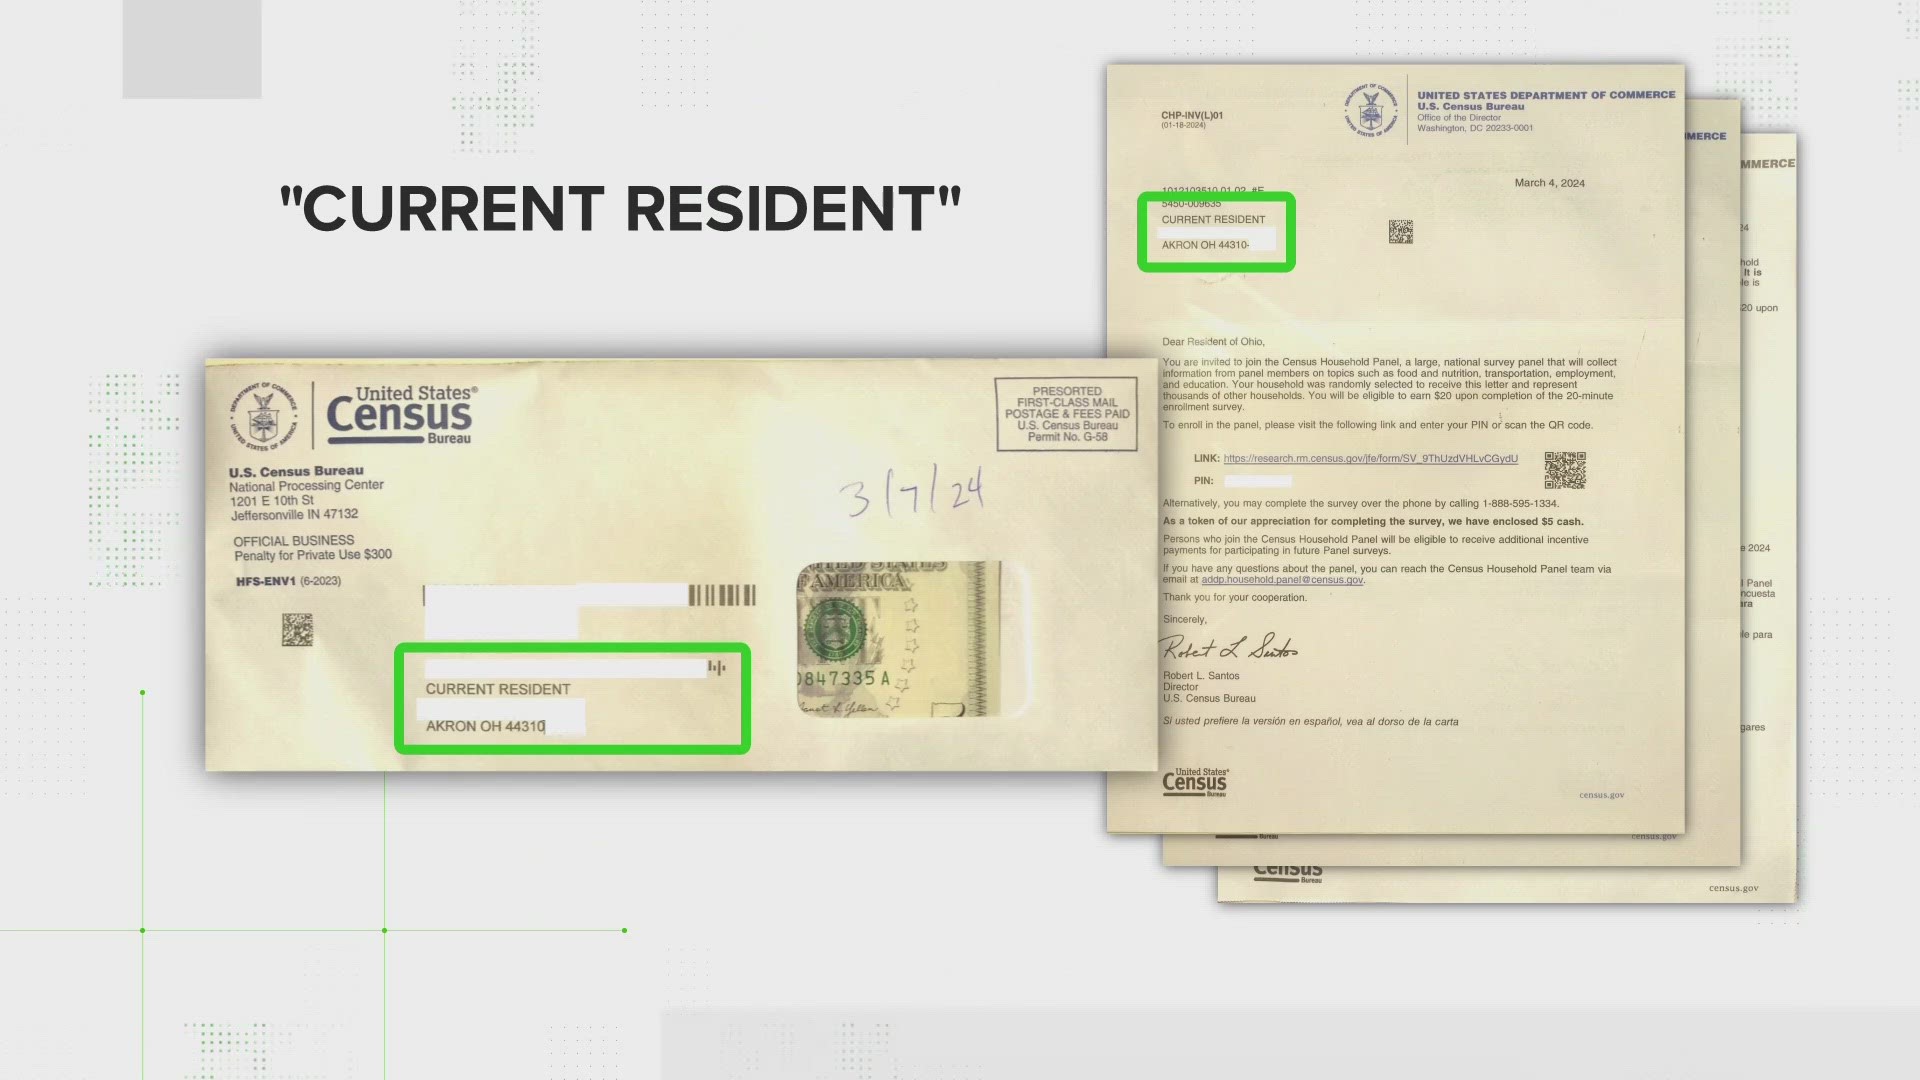 We VERIFY multiple letters received by a 3News viewer in the mail, addressed to 'CURRENT RESIDENT,' that are legitimately from the US Census Bureau.